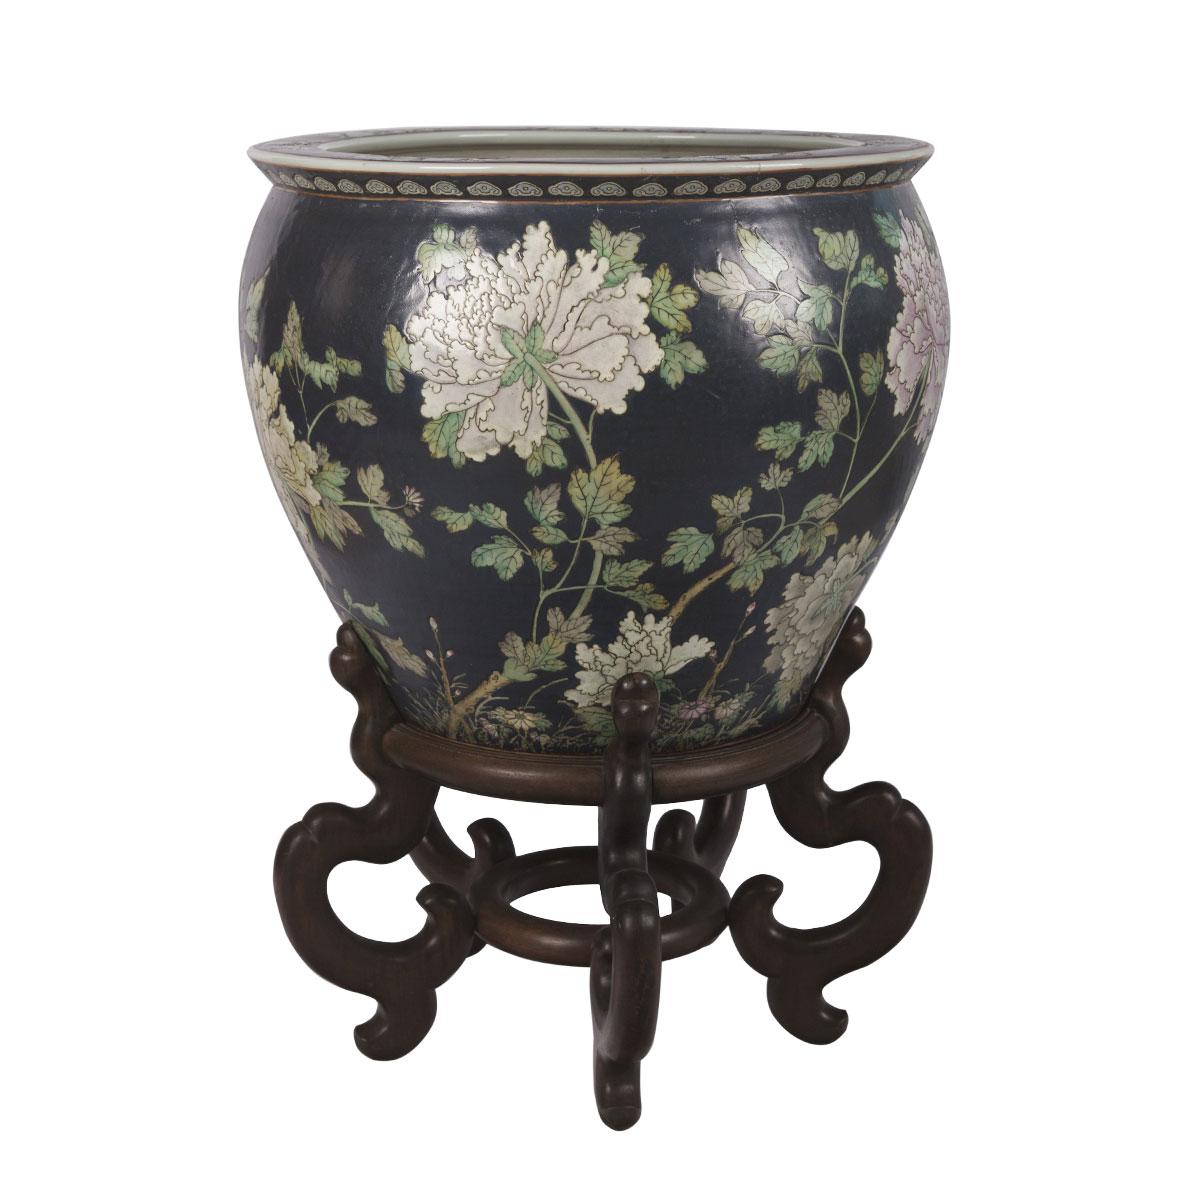 This porcelain Chinese flower pattern fish bowl was created in Hong Kong, China around 1960. Fish bowl is round in shape, the porcelain bowl features beautiful hand painted floral design throughout the exterior. The interior is painted on the inside